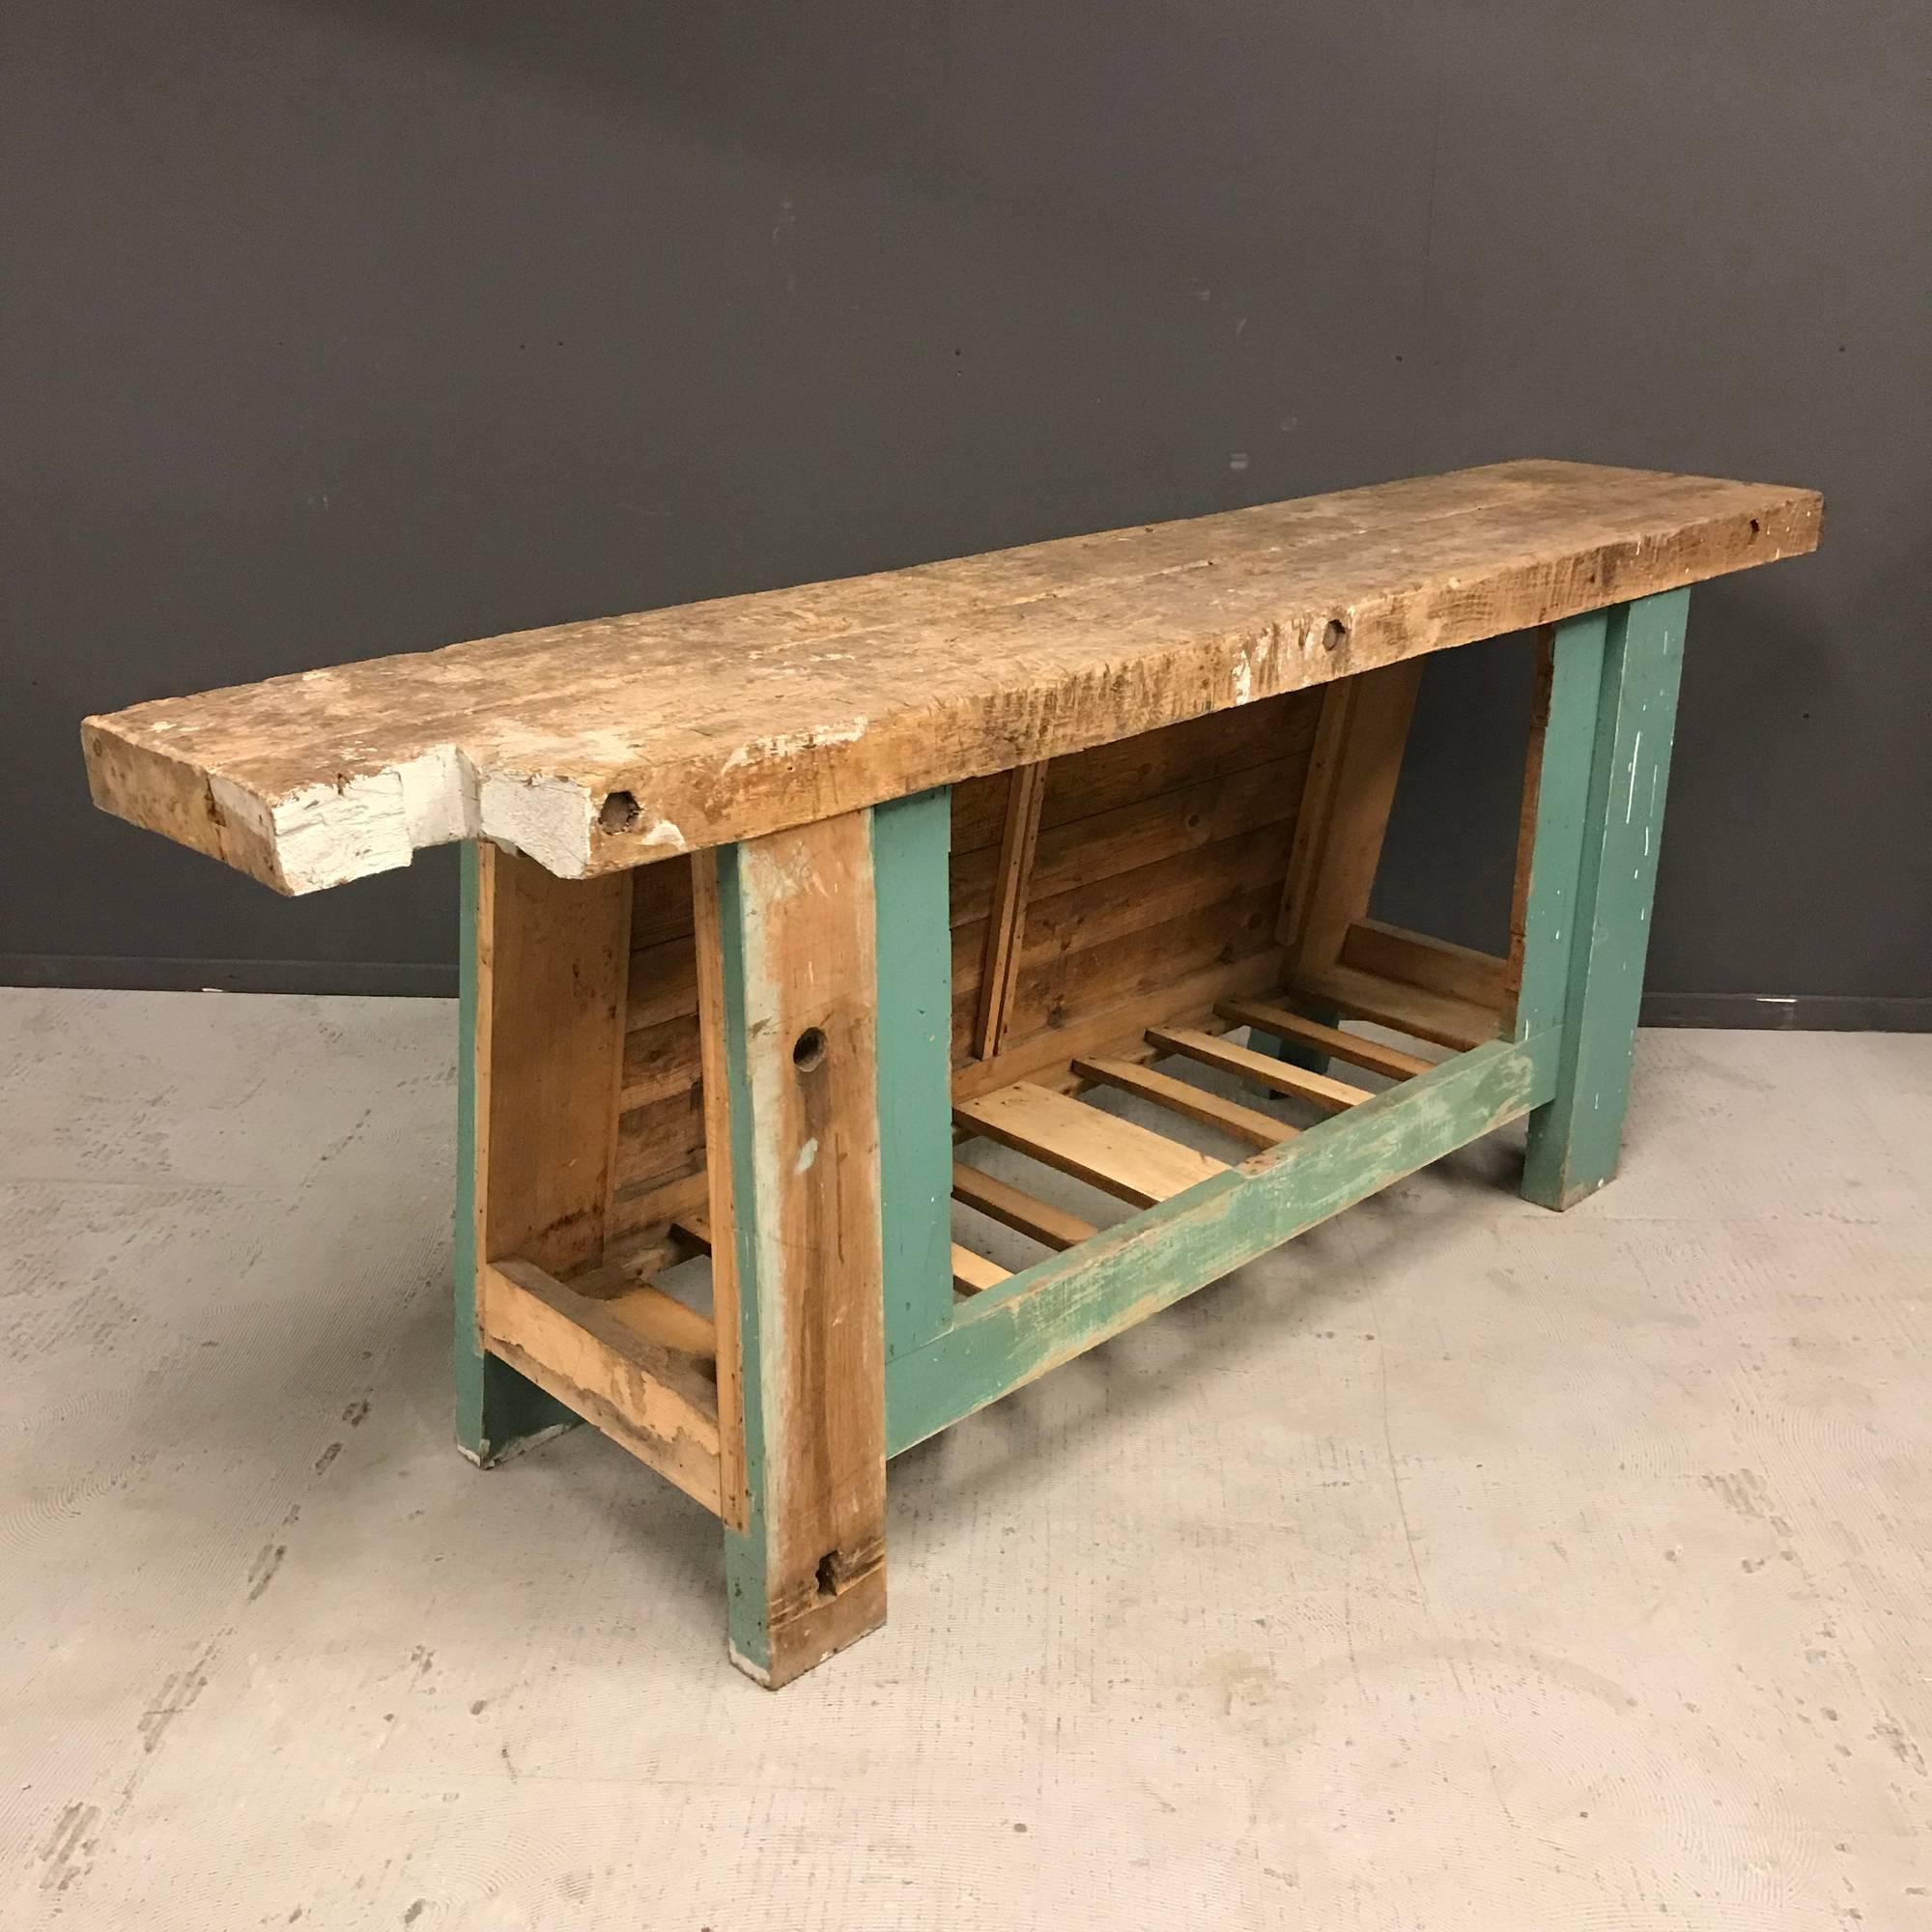 French wooden carpenters workbench. Has been cleaned and treated against termites and woodworm.
France, early 20th century
Size of this French Blue carpenters workbench
201 x 52 x 85 cm.
   